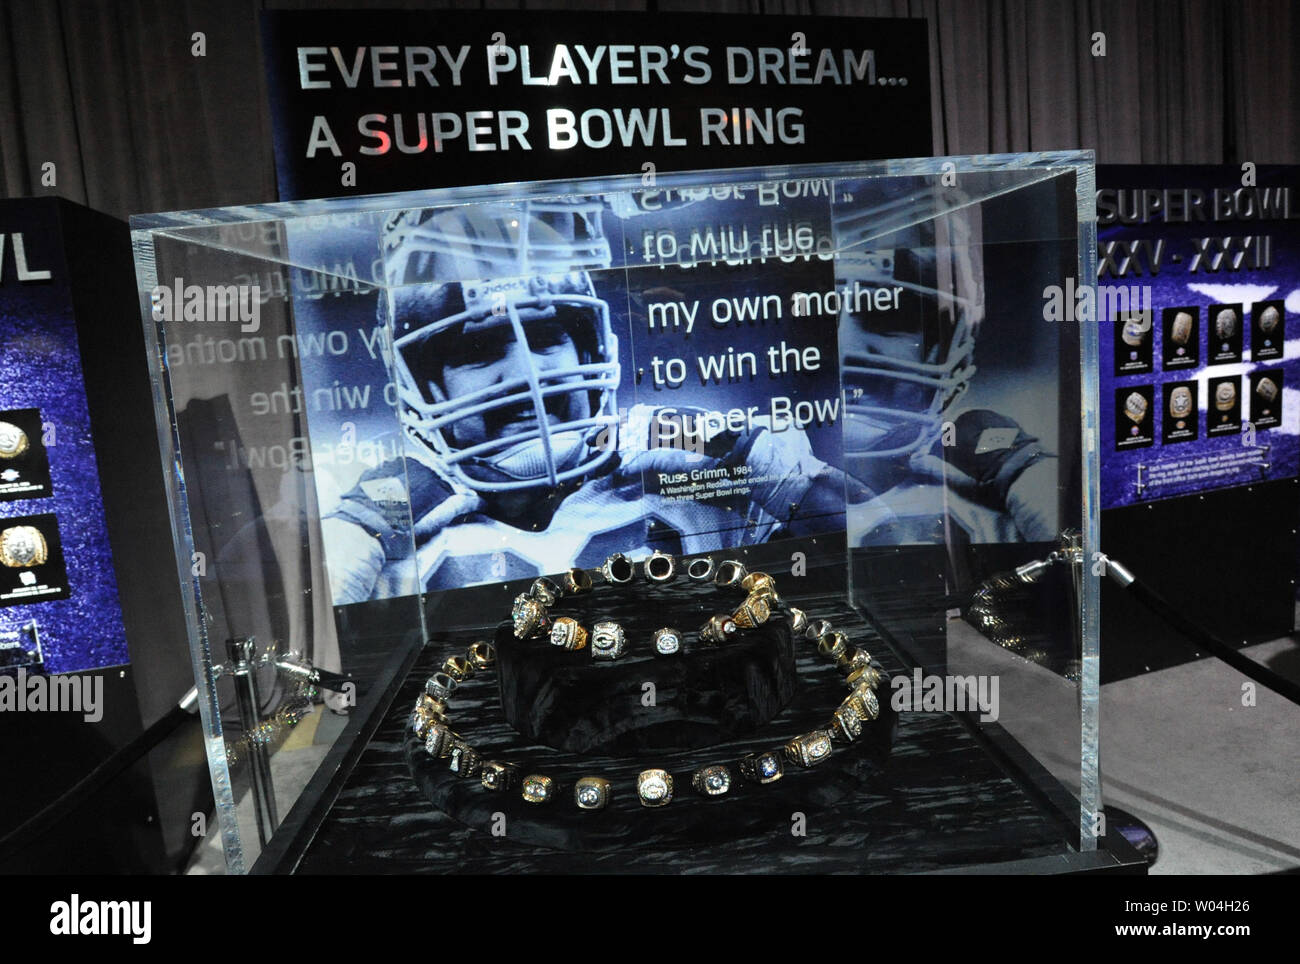 All of the Super Bowl rings are on display for National Football League fans at the NFL Experience at the Indianapolis Convention Center in downtown Indianapolis, Indiana on February 3, 2012.   The New England Patriots play the New York Giants in the Super Bowl on February 5, 2012.   UPI/Pat Benic Stock Photo